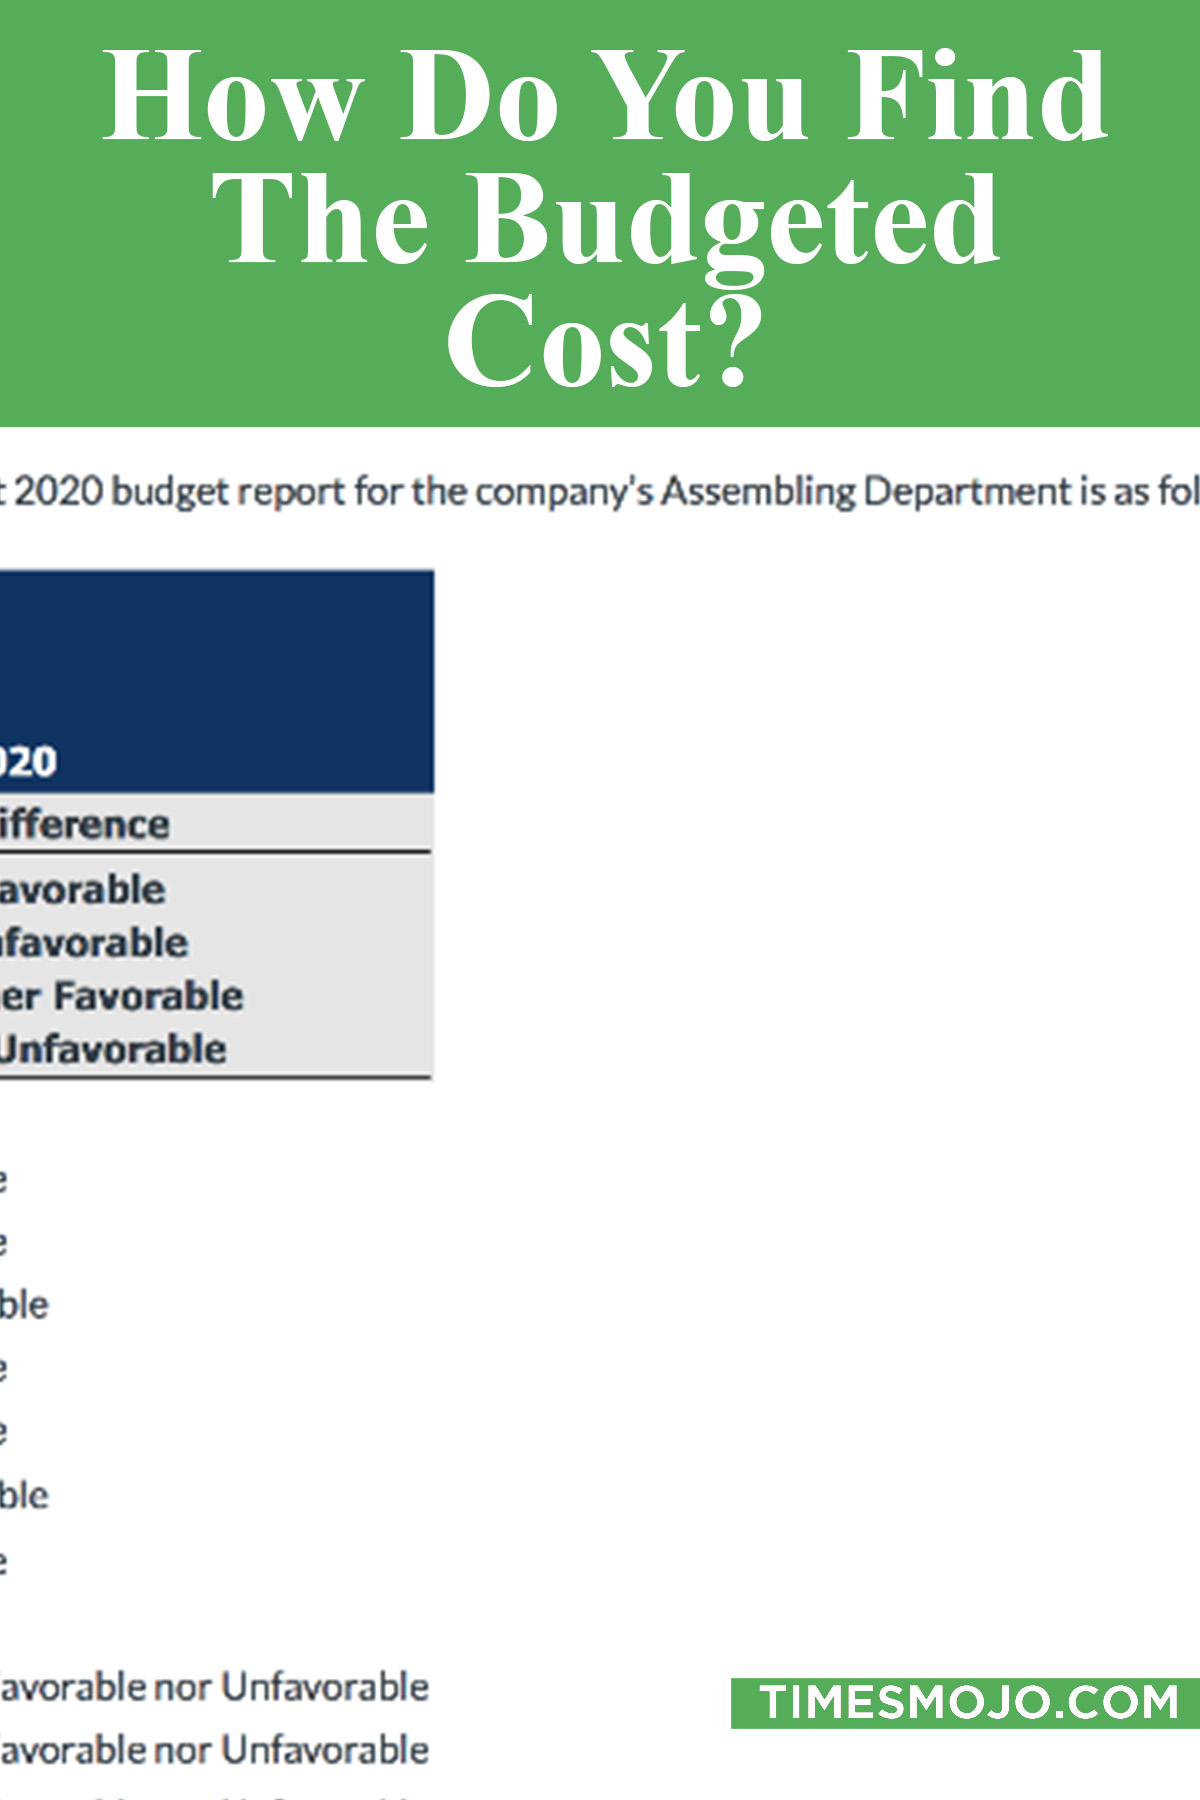 How Do You Find The Budgeted Cost